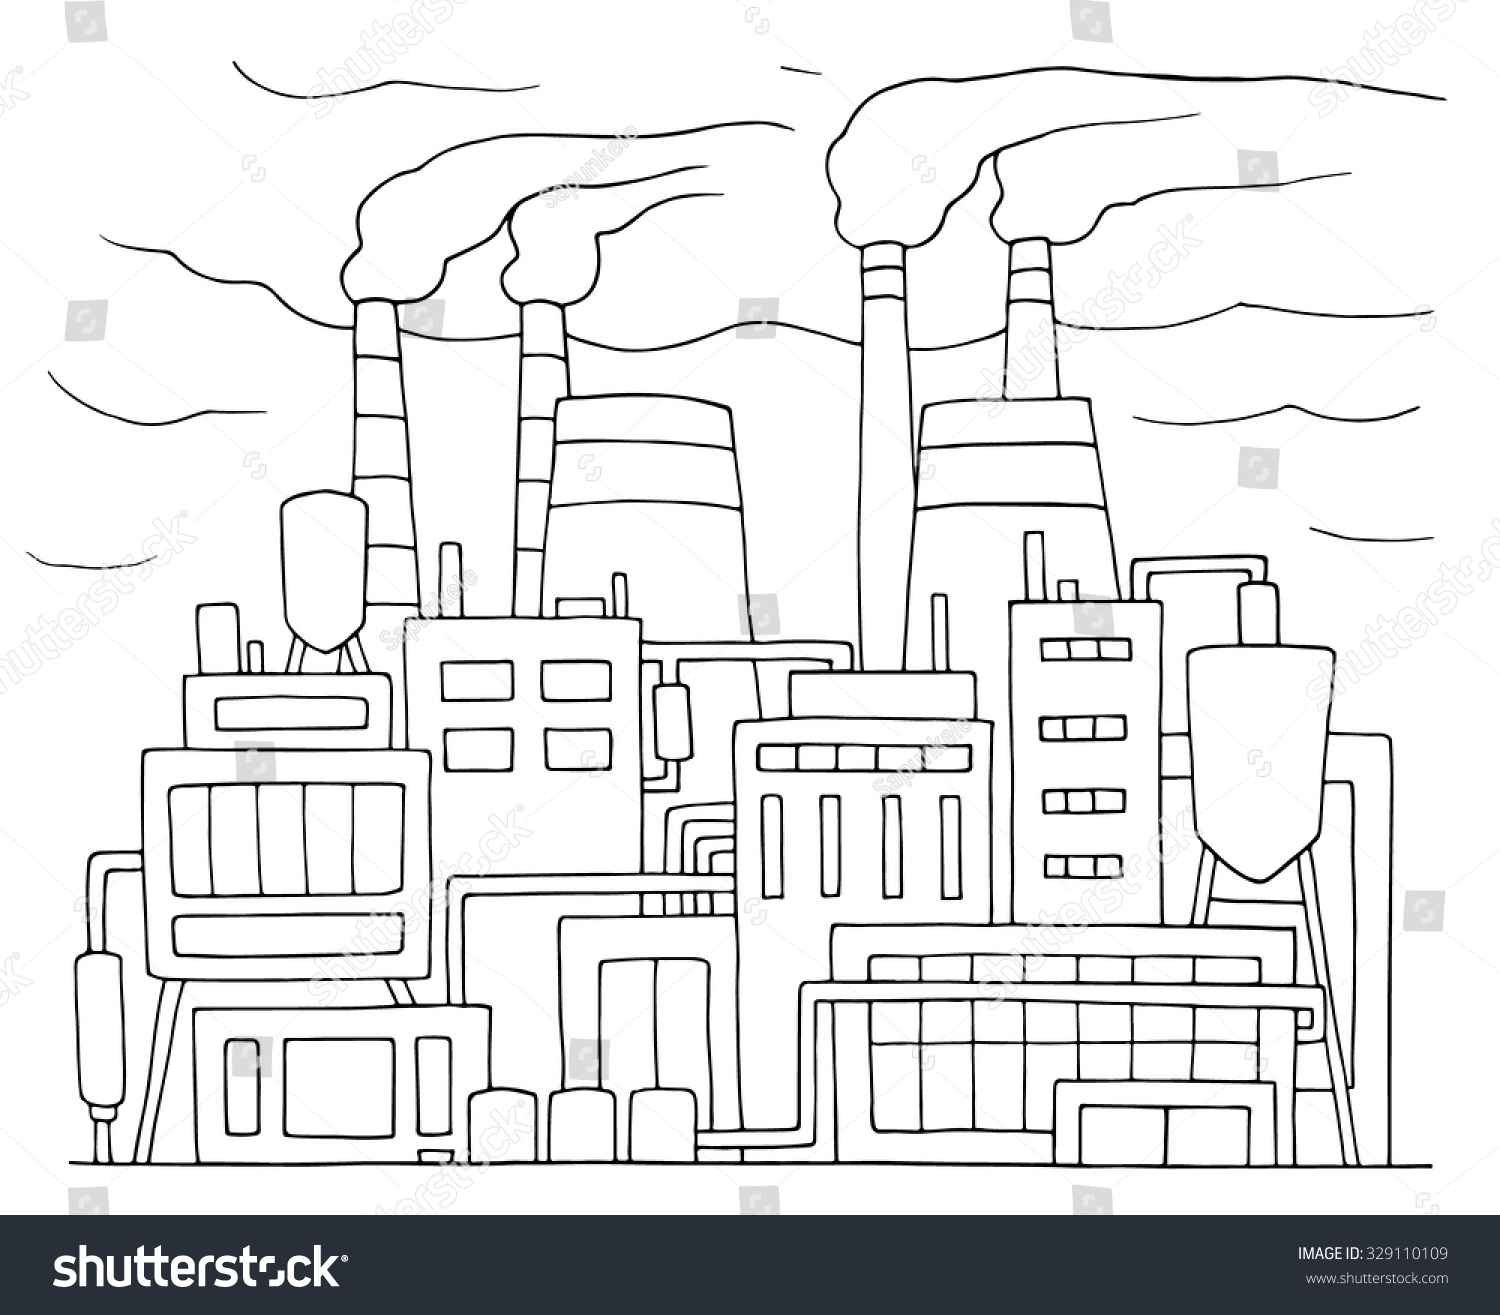 Industrial Cartoon Sketch Of Nuclear Power Station. Doodle Factory With ...